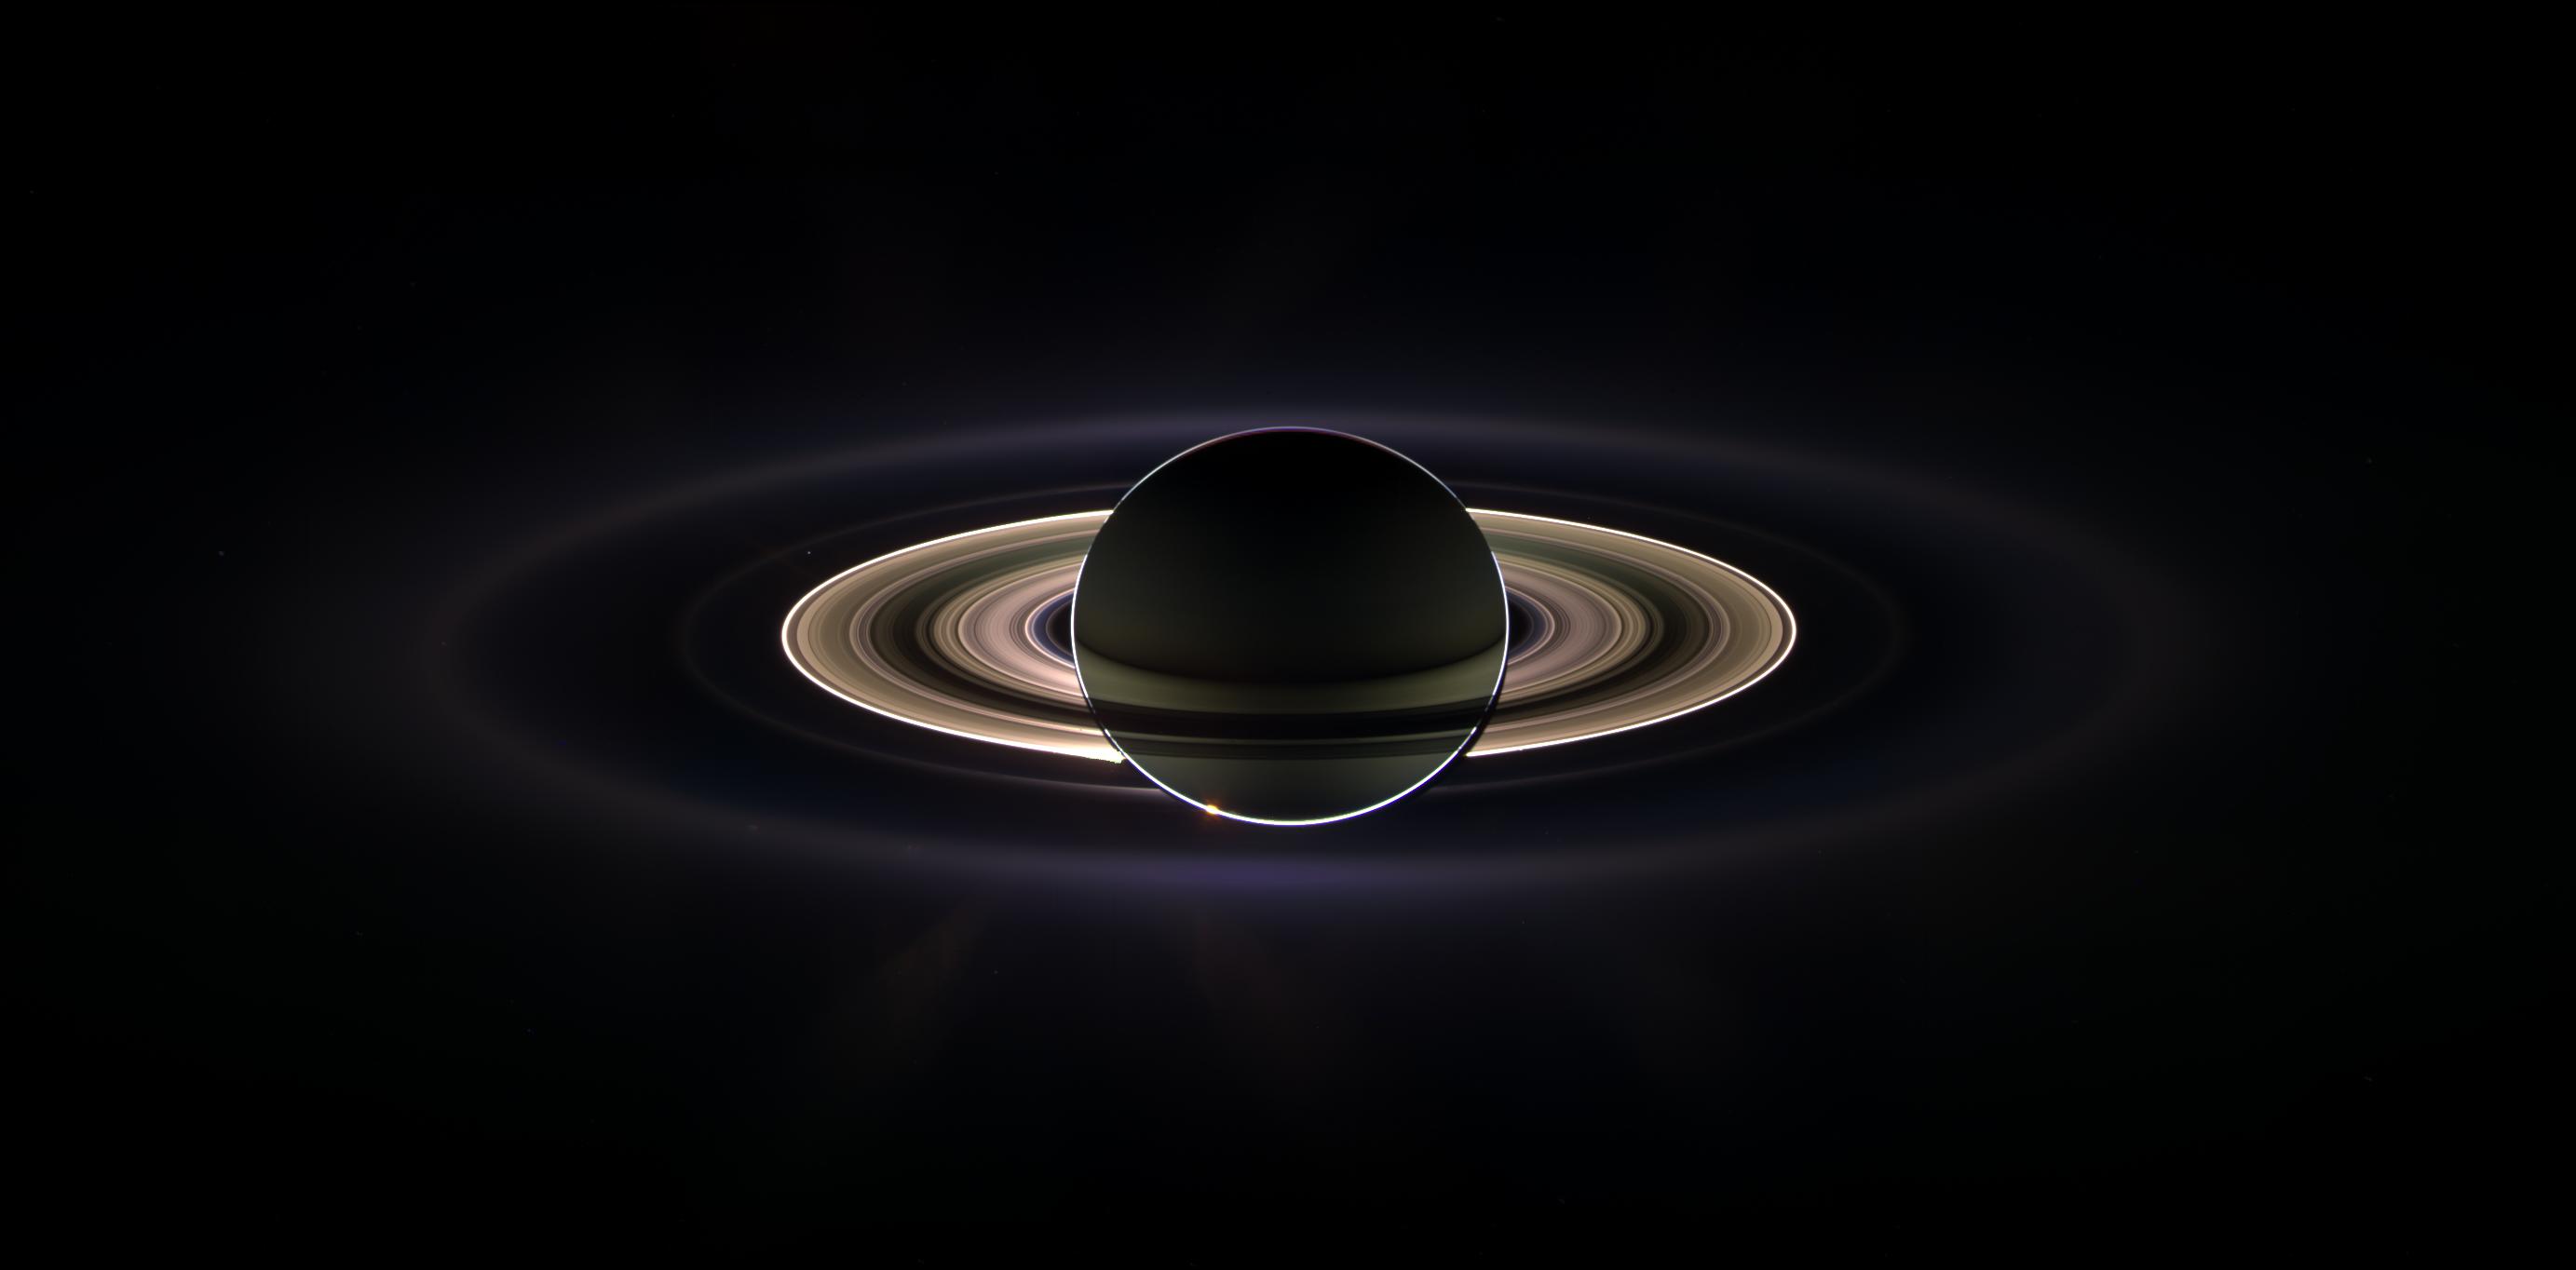 Giant Saturn hanging in the blackness